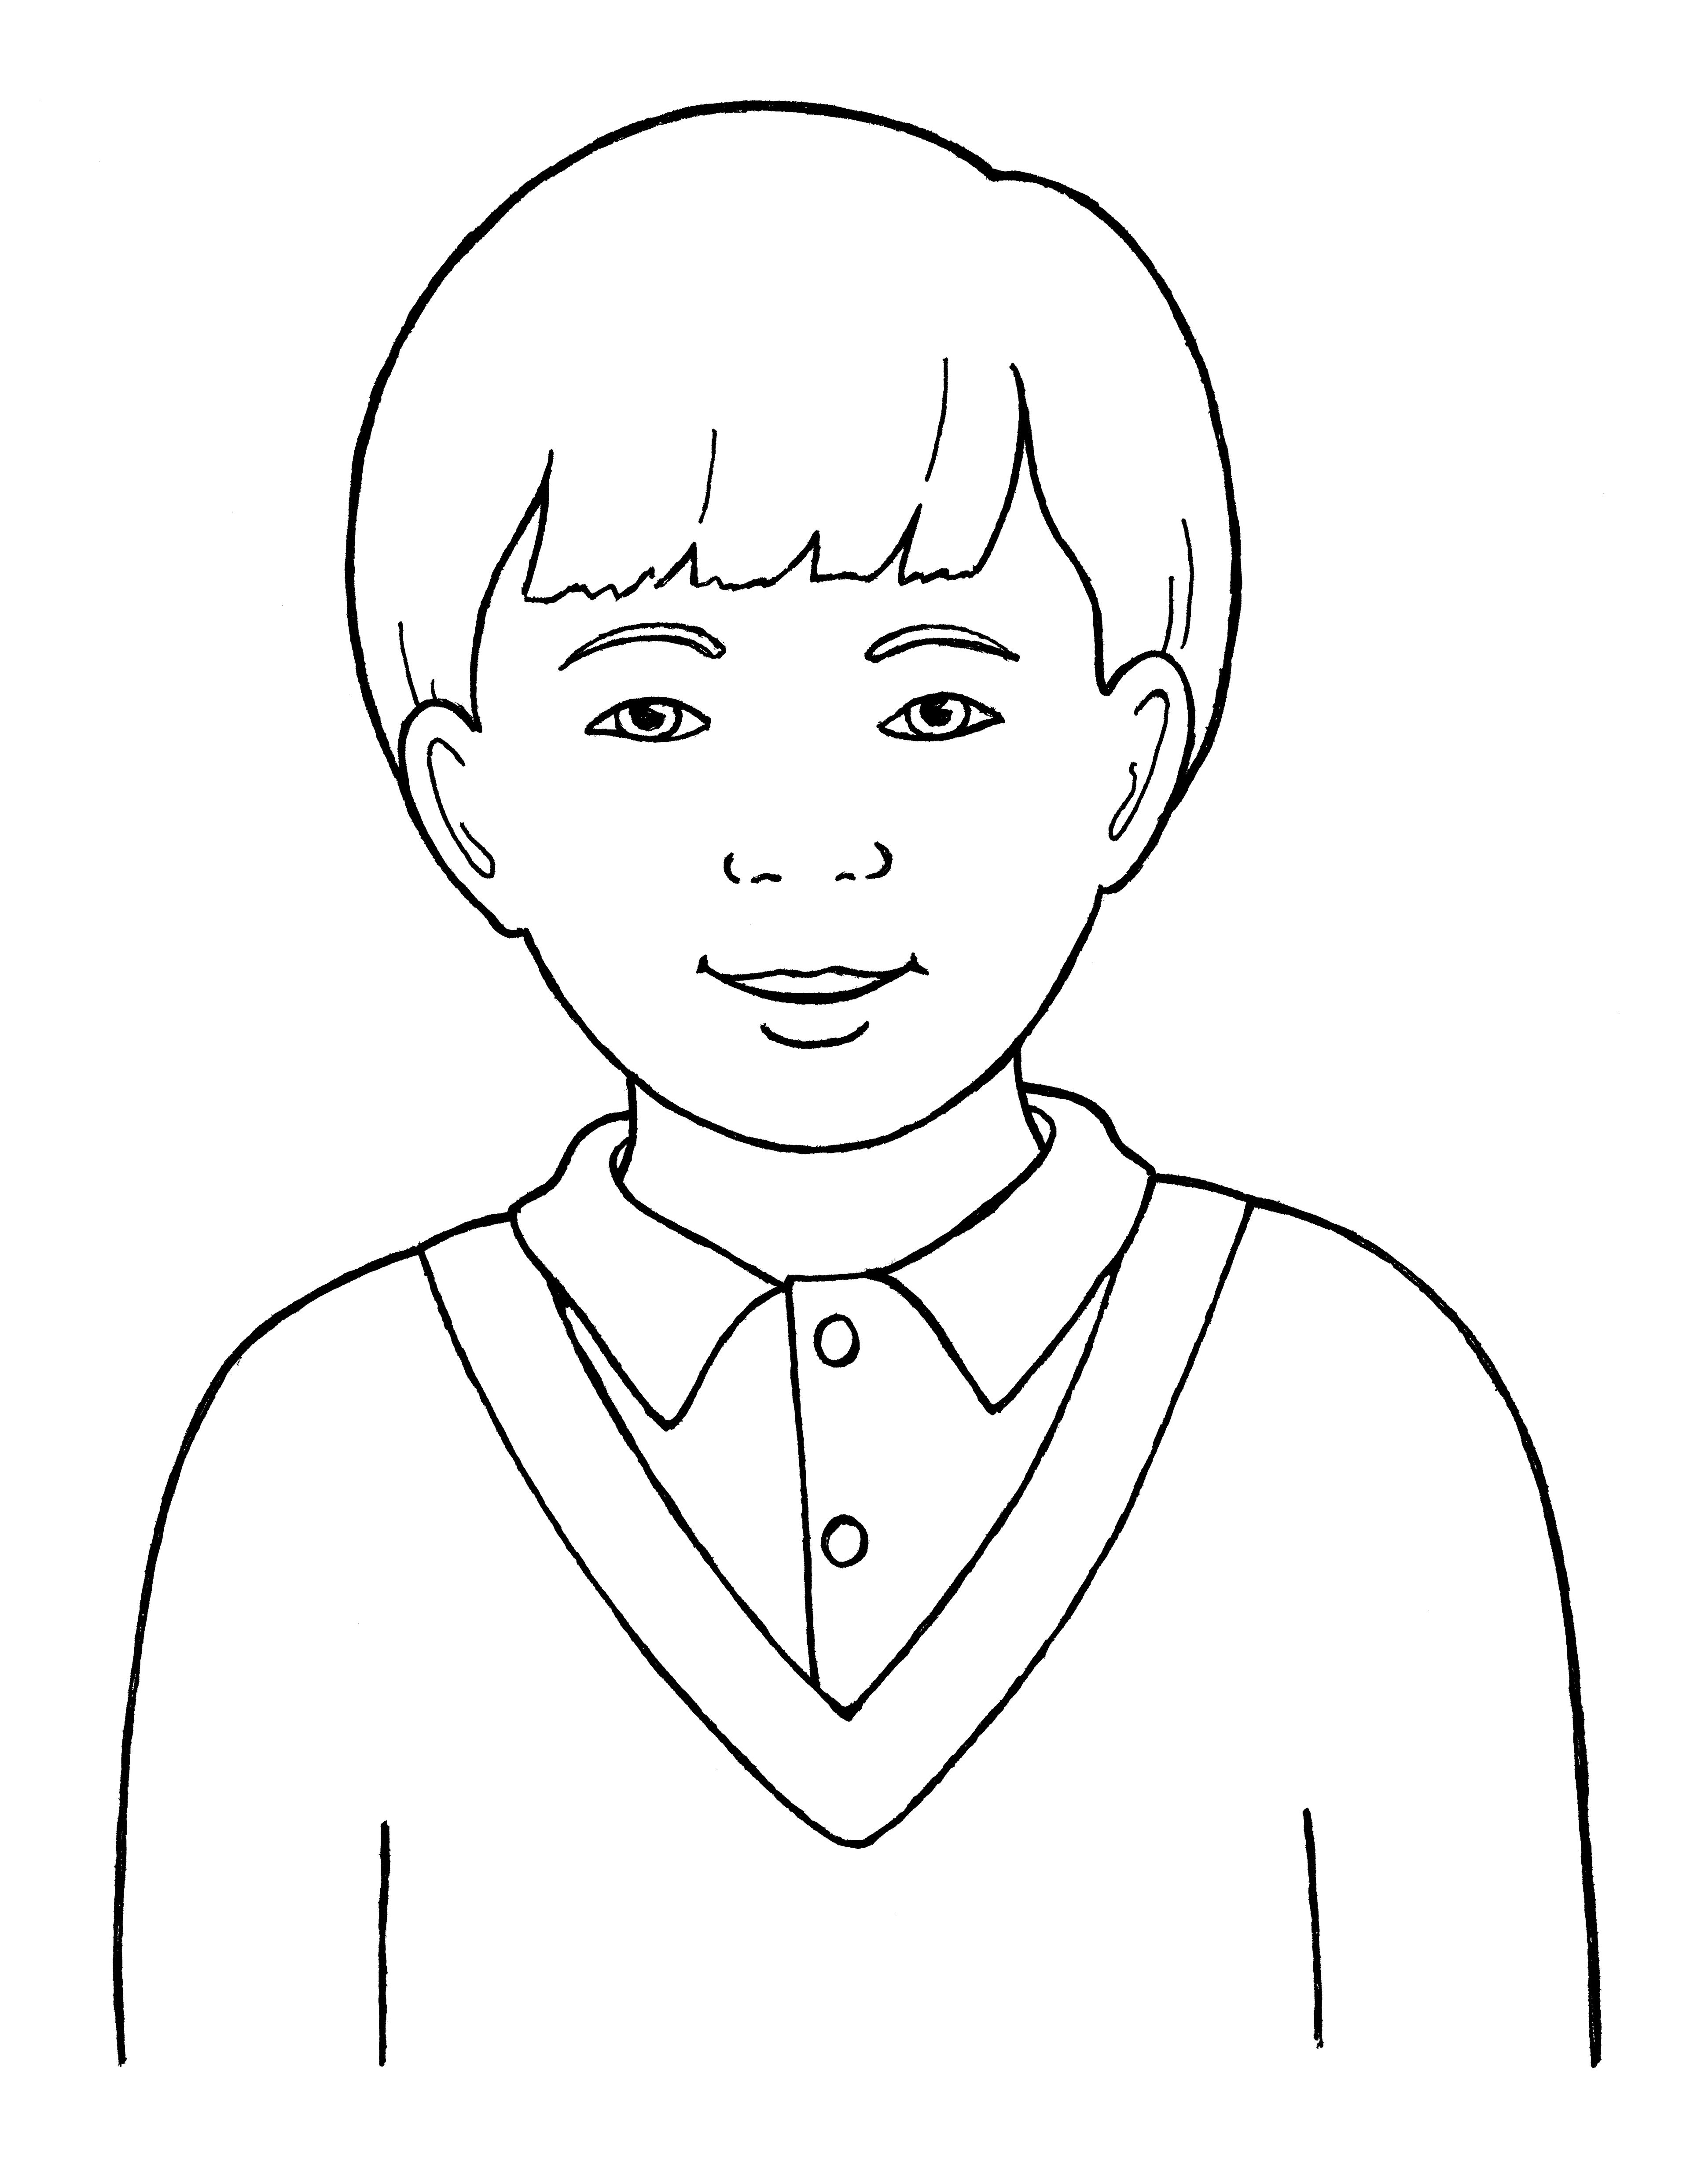 An illustration of a young Primary boy, from the nursery manual Behold Your Little Ones (2008); see pages 11, 23, and 74.